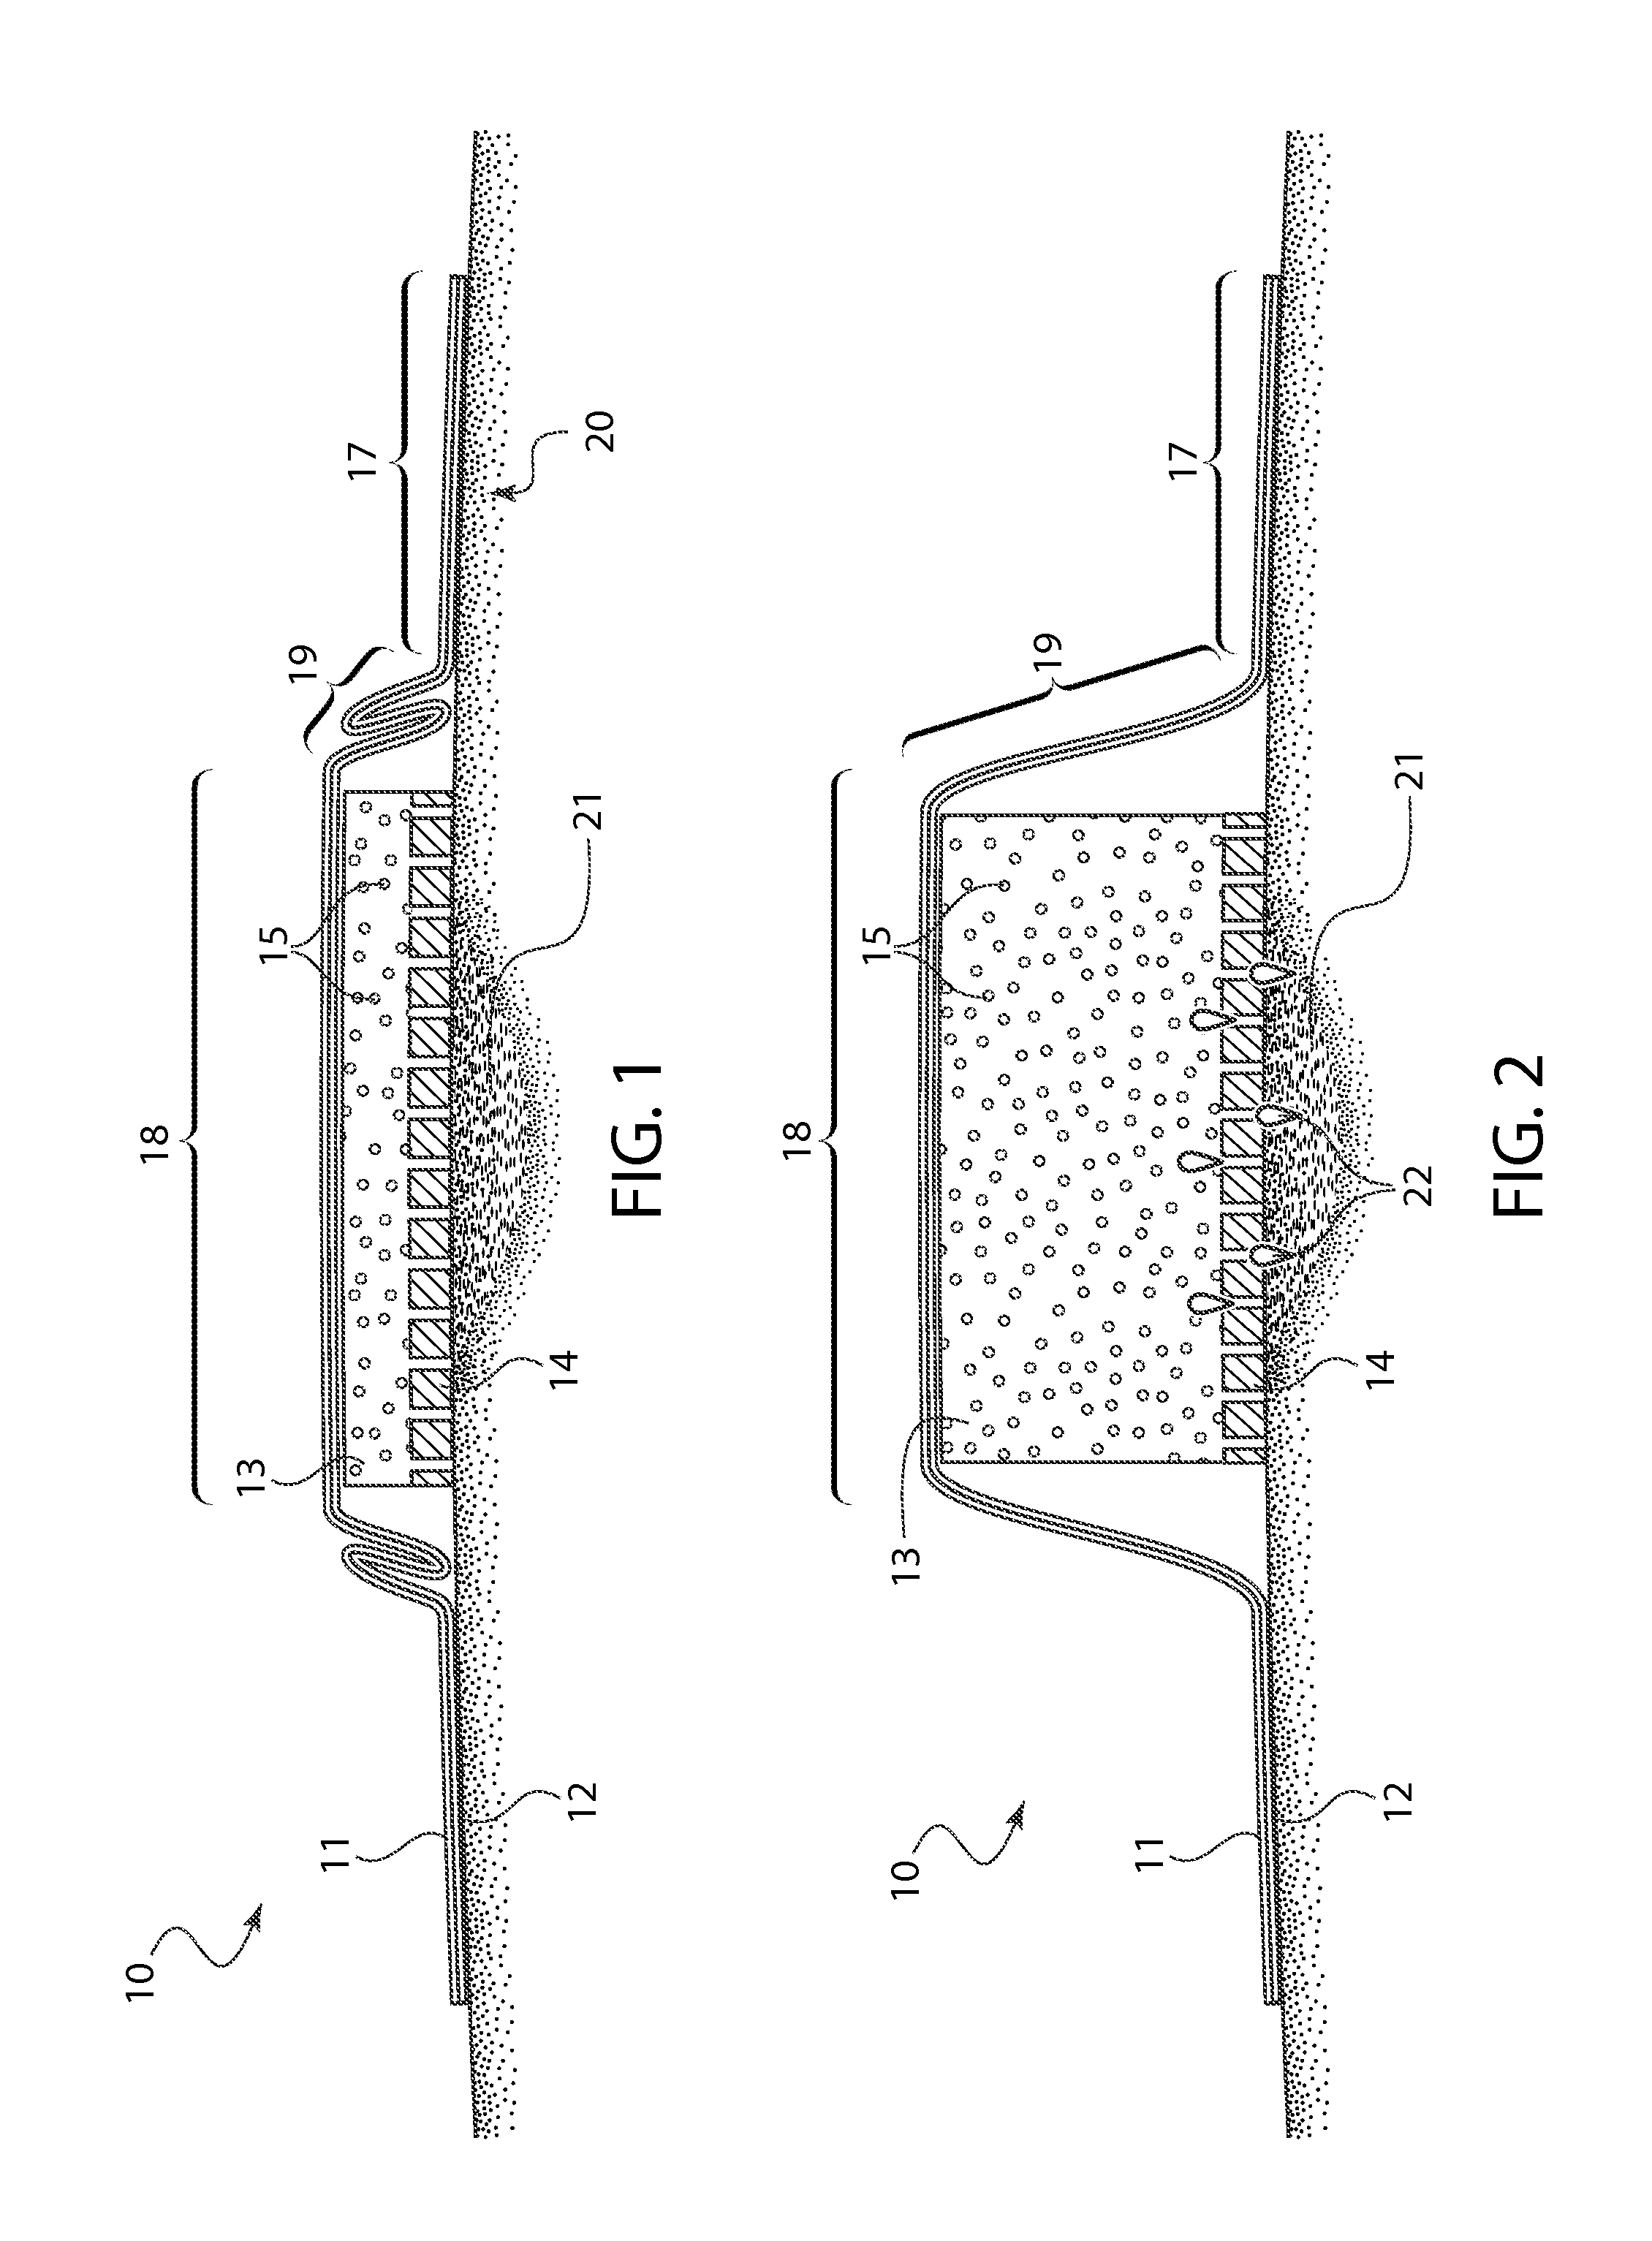 Bandage with a compressed layer that expands upon contact with liquid